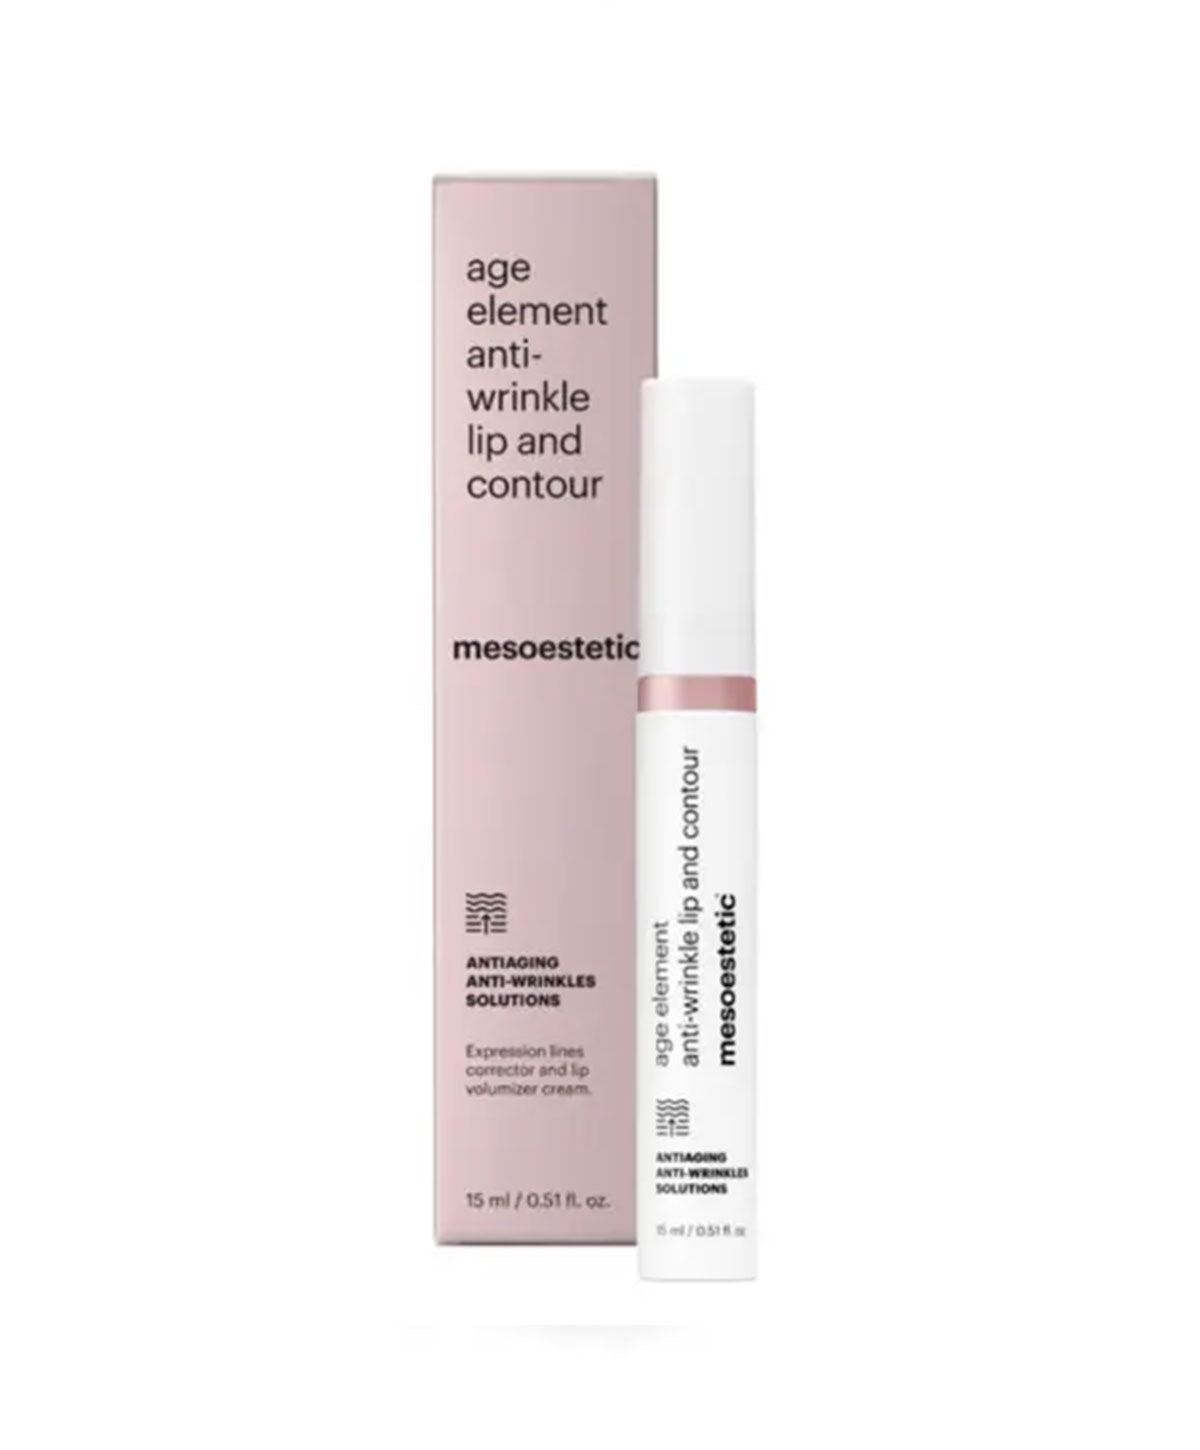 Mesoestetic Age Element Anti-wrinkle Lip and Contour